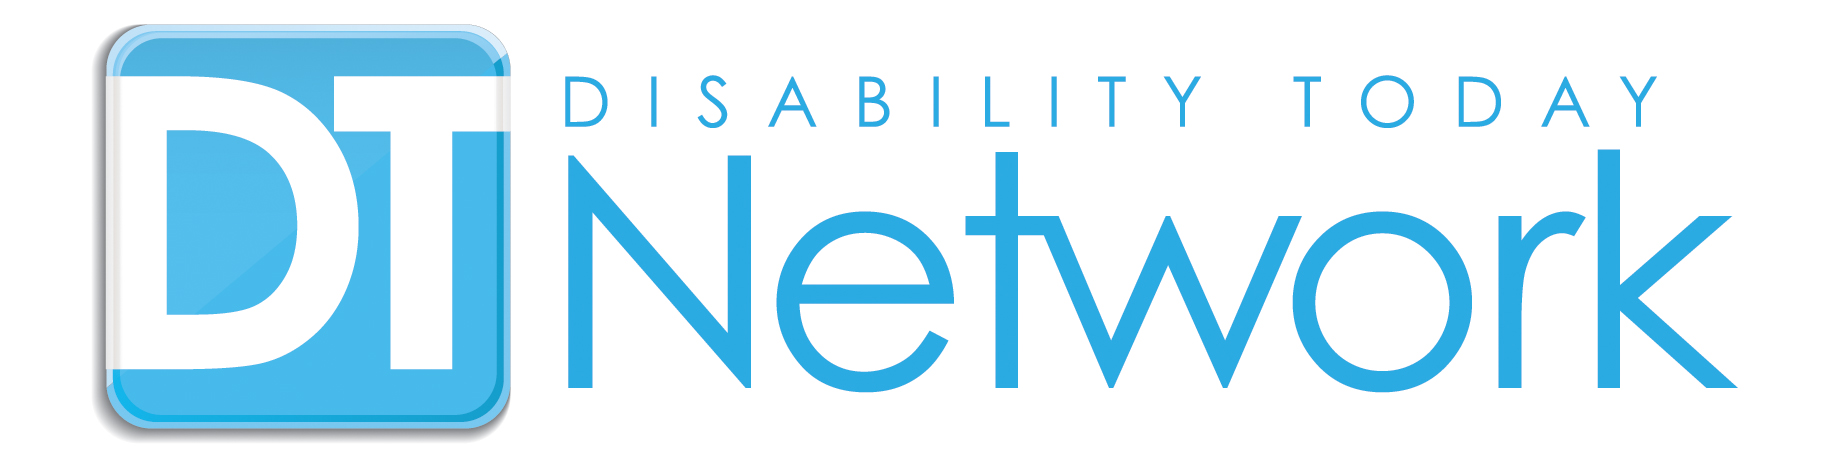 Disability Today logo